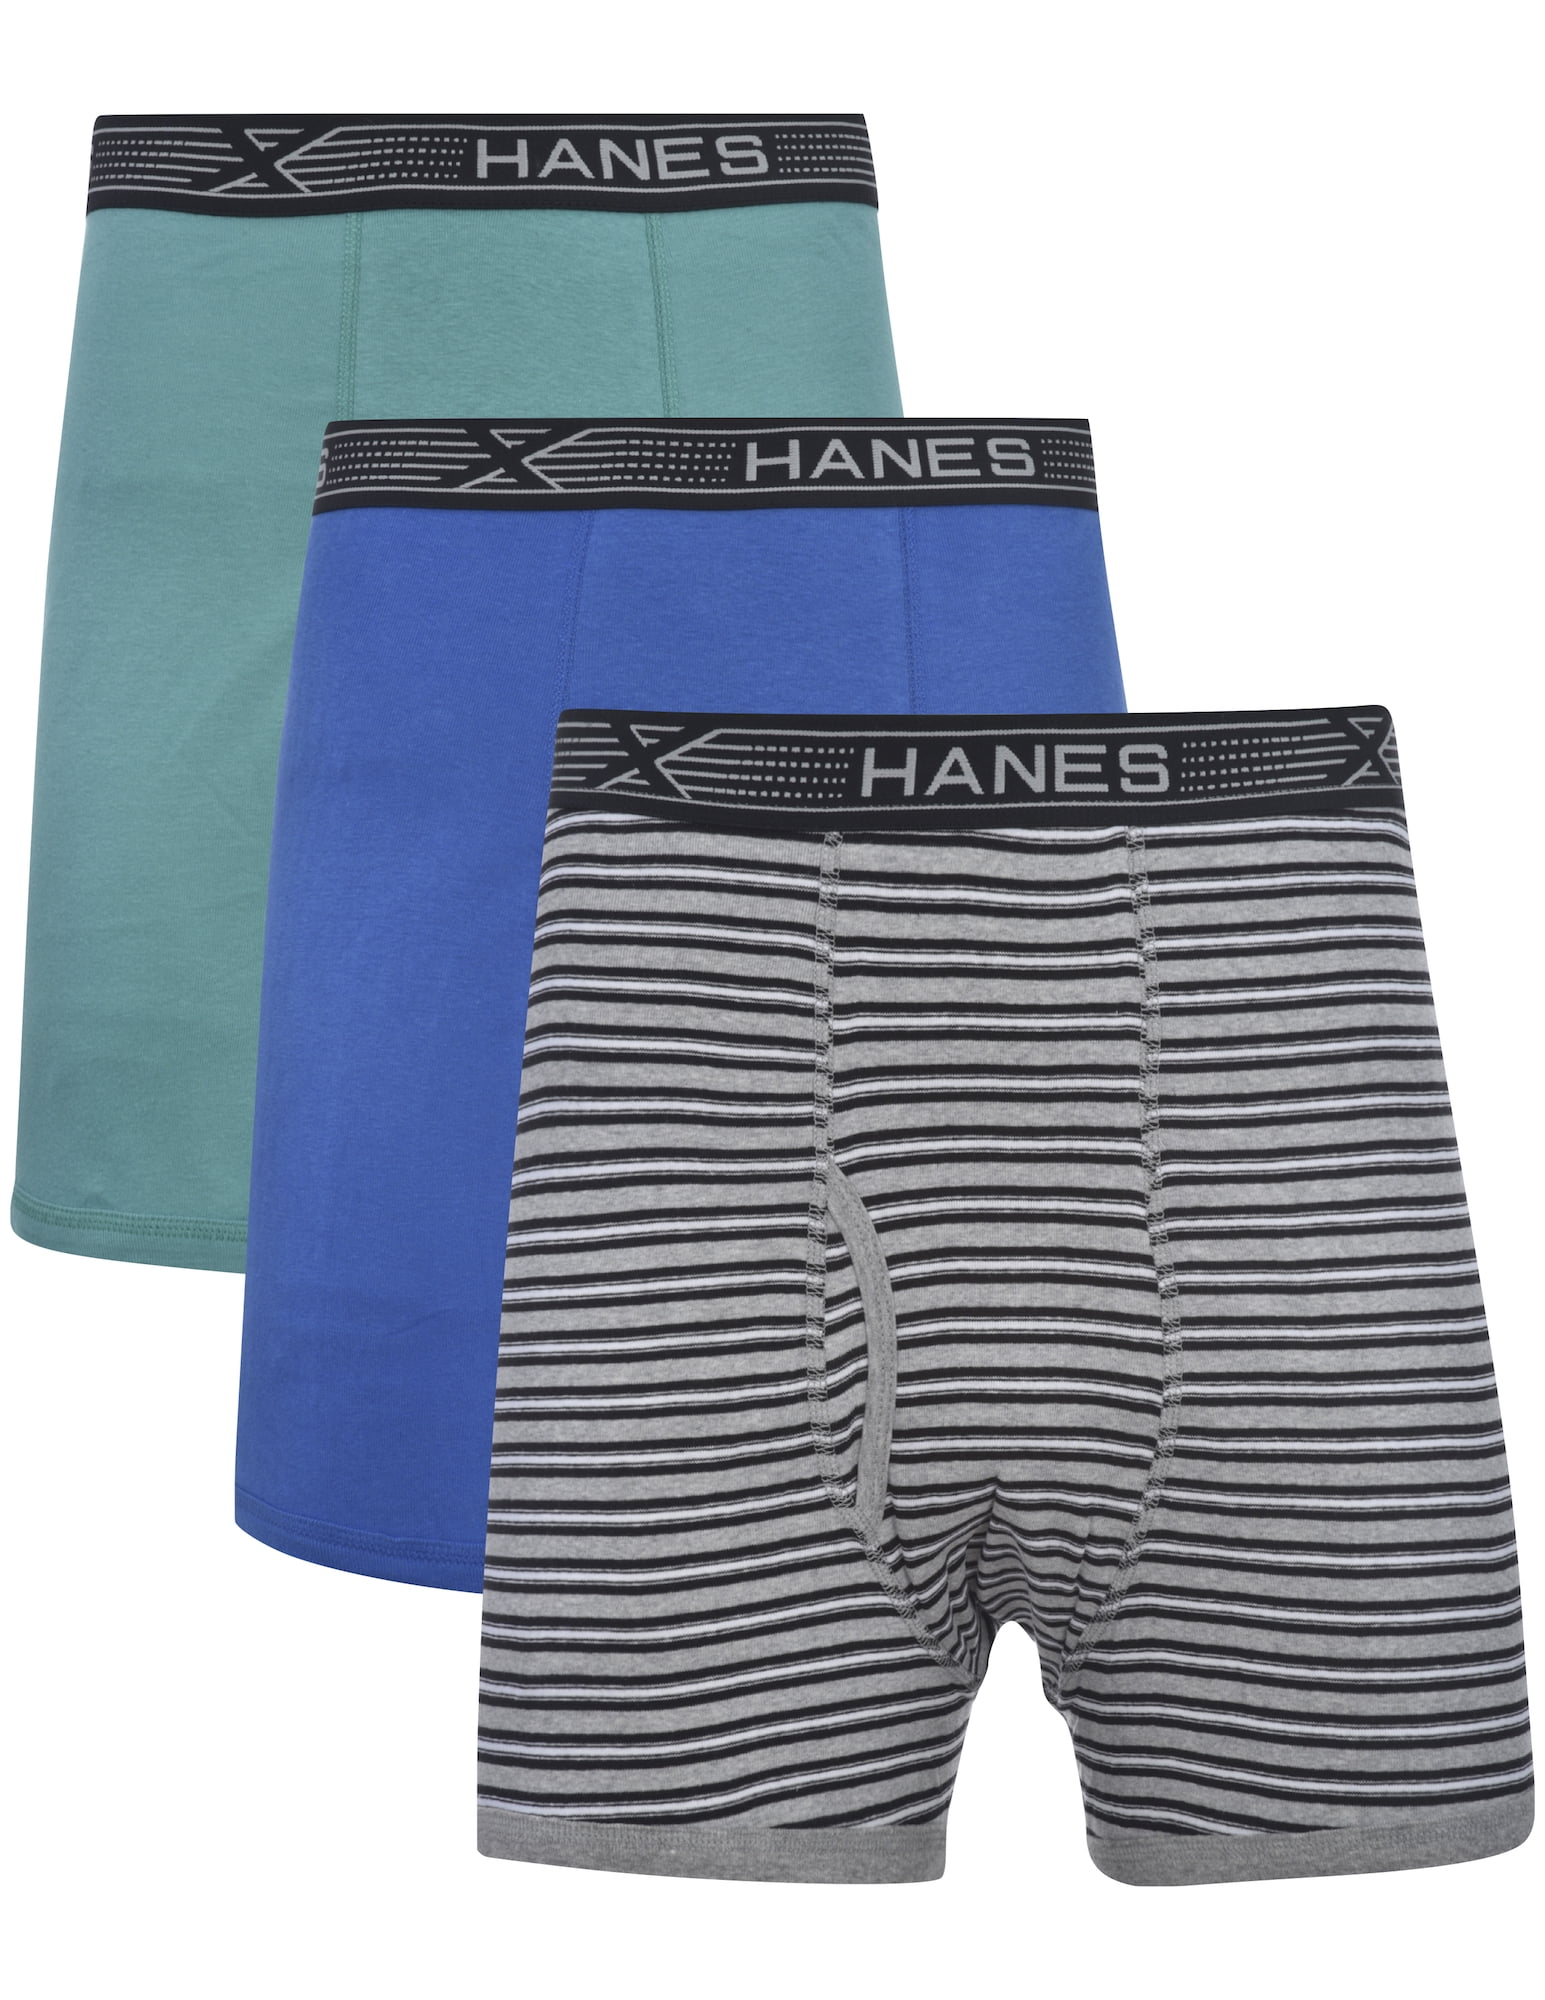 Hanes Men's 4-Pack Comfortsoft Extended Sizes Boxer Briefs 3X-Large Assorted